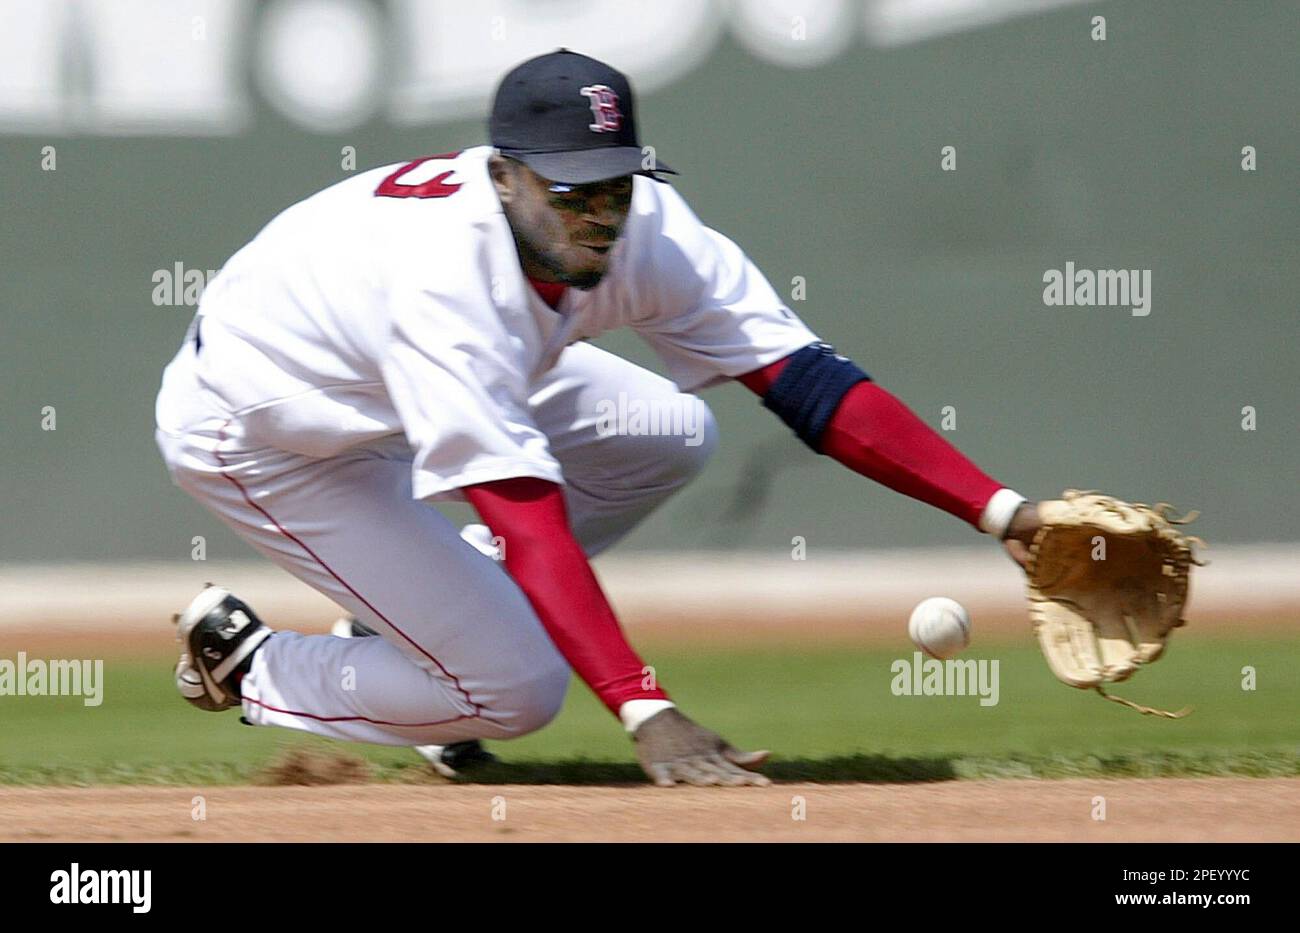 Boston Red Sox shortstop Pokey Reese has trouble tracking down a ground  ball hit by Kansas City Royals batter Ken Harvey in the third inning at  Fenway Park in Boston, Saturday, May